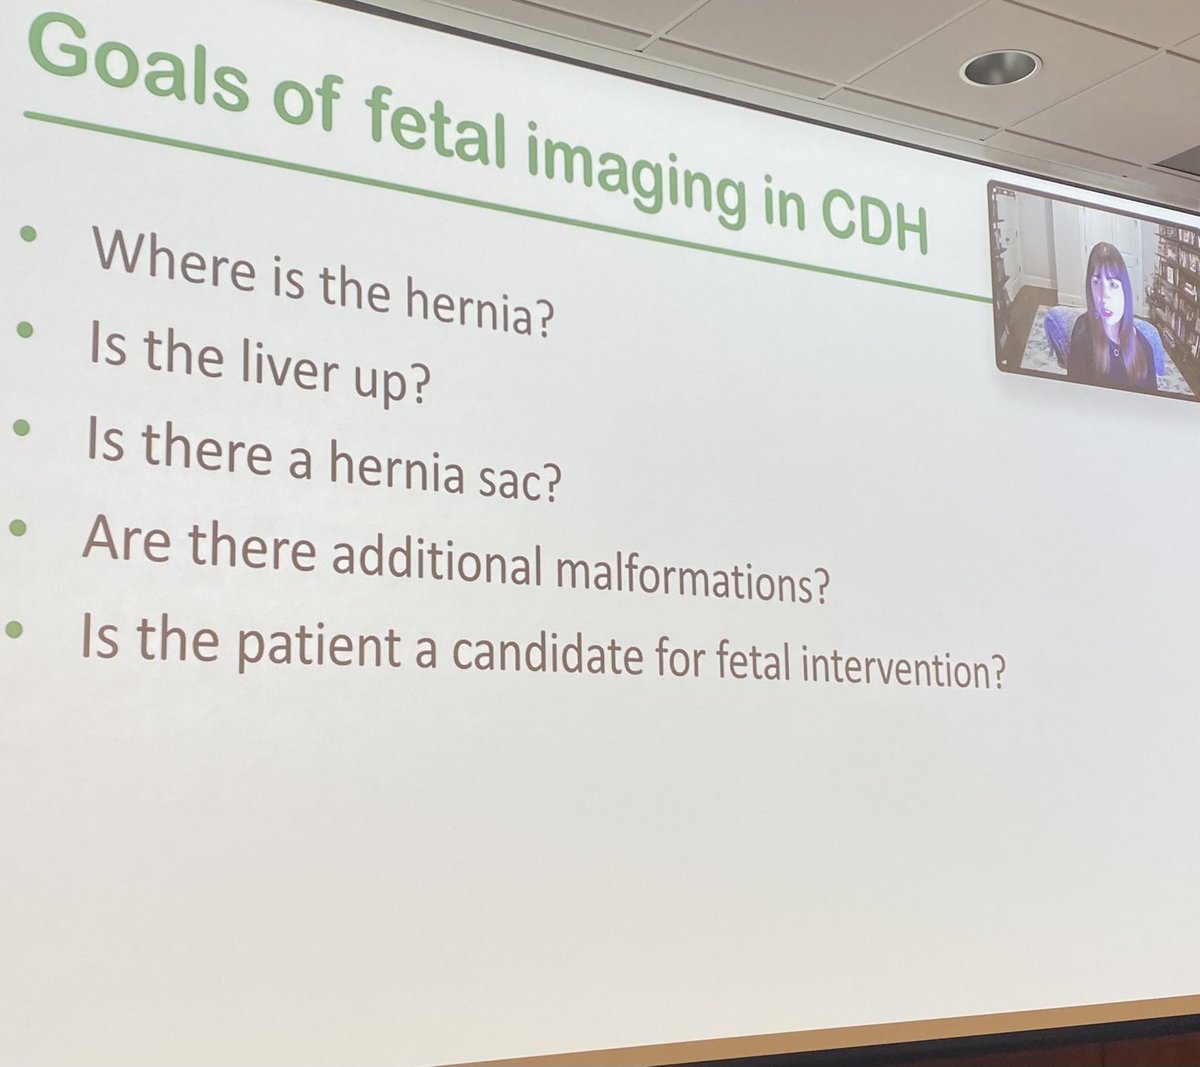 ⁦⁦@UNCRadiology⁩ Grand Rounds speaker today was the amazing ⁦@AmyMehollinRay⁩! Such a wonderful didactic lecture about Pre and Postnatal imaging of CDH. #pedrad #fetalimaging #neonatalimaging